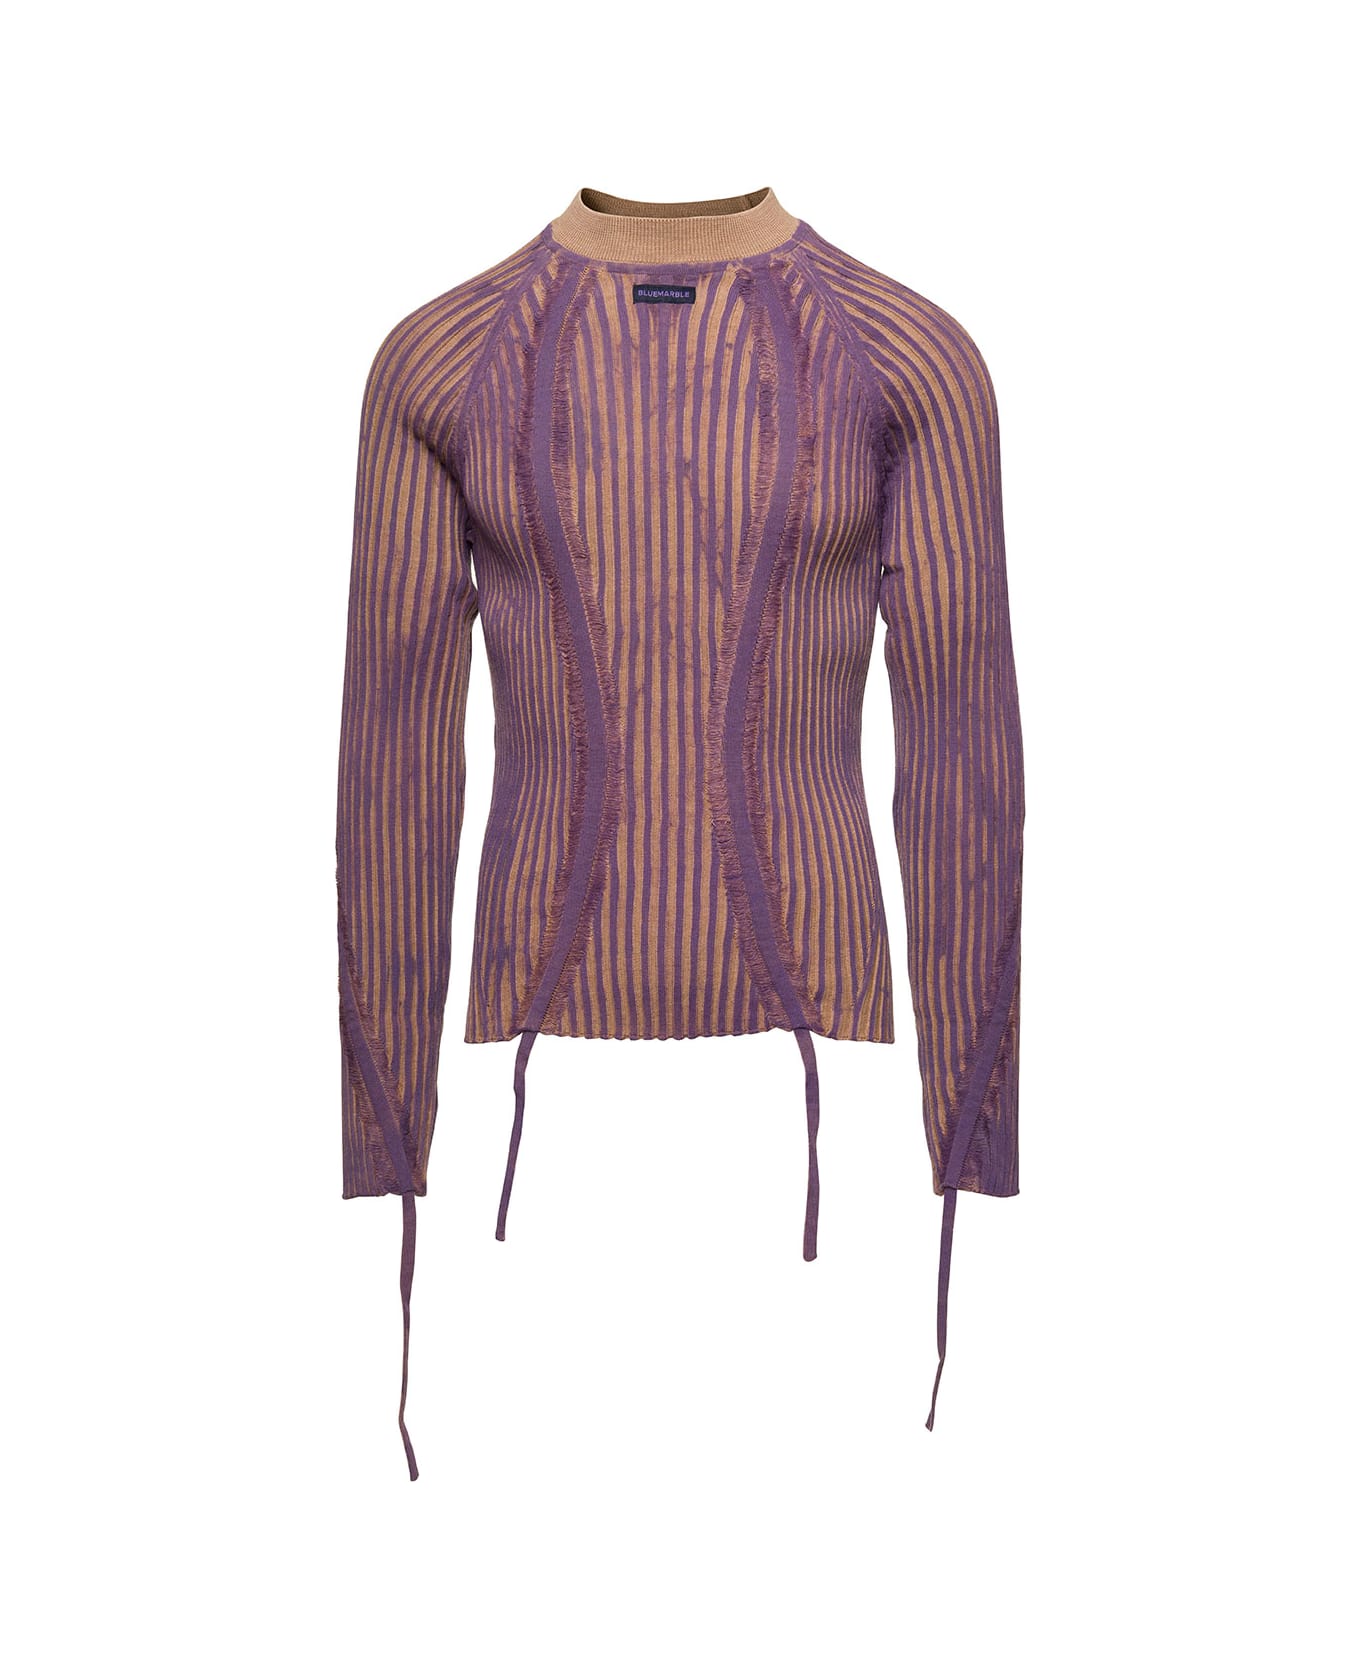 Bluemarble Beige And Violet Hand-painted Rib Sweater With Drawstring In Wool Man - Beige